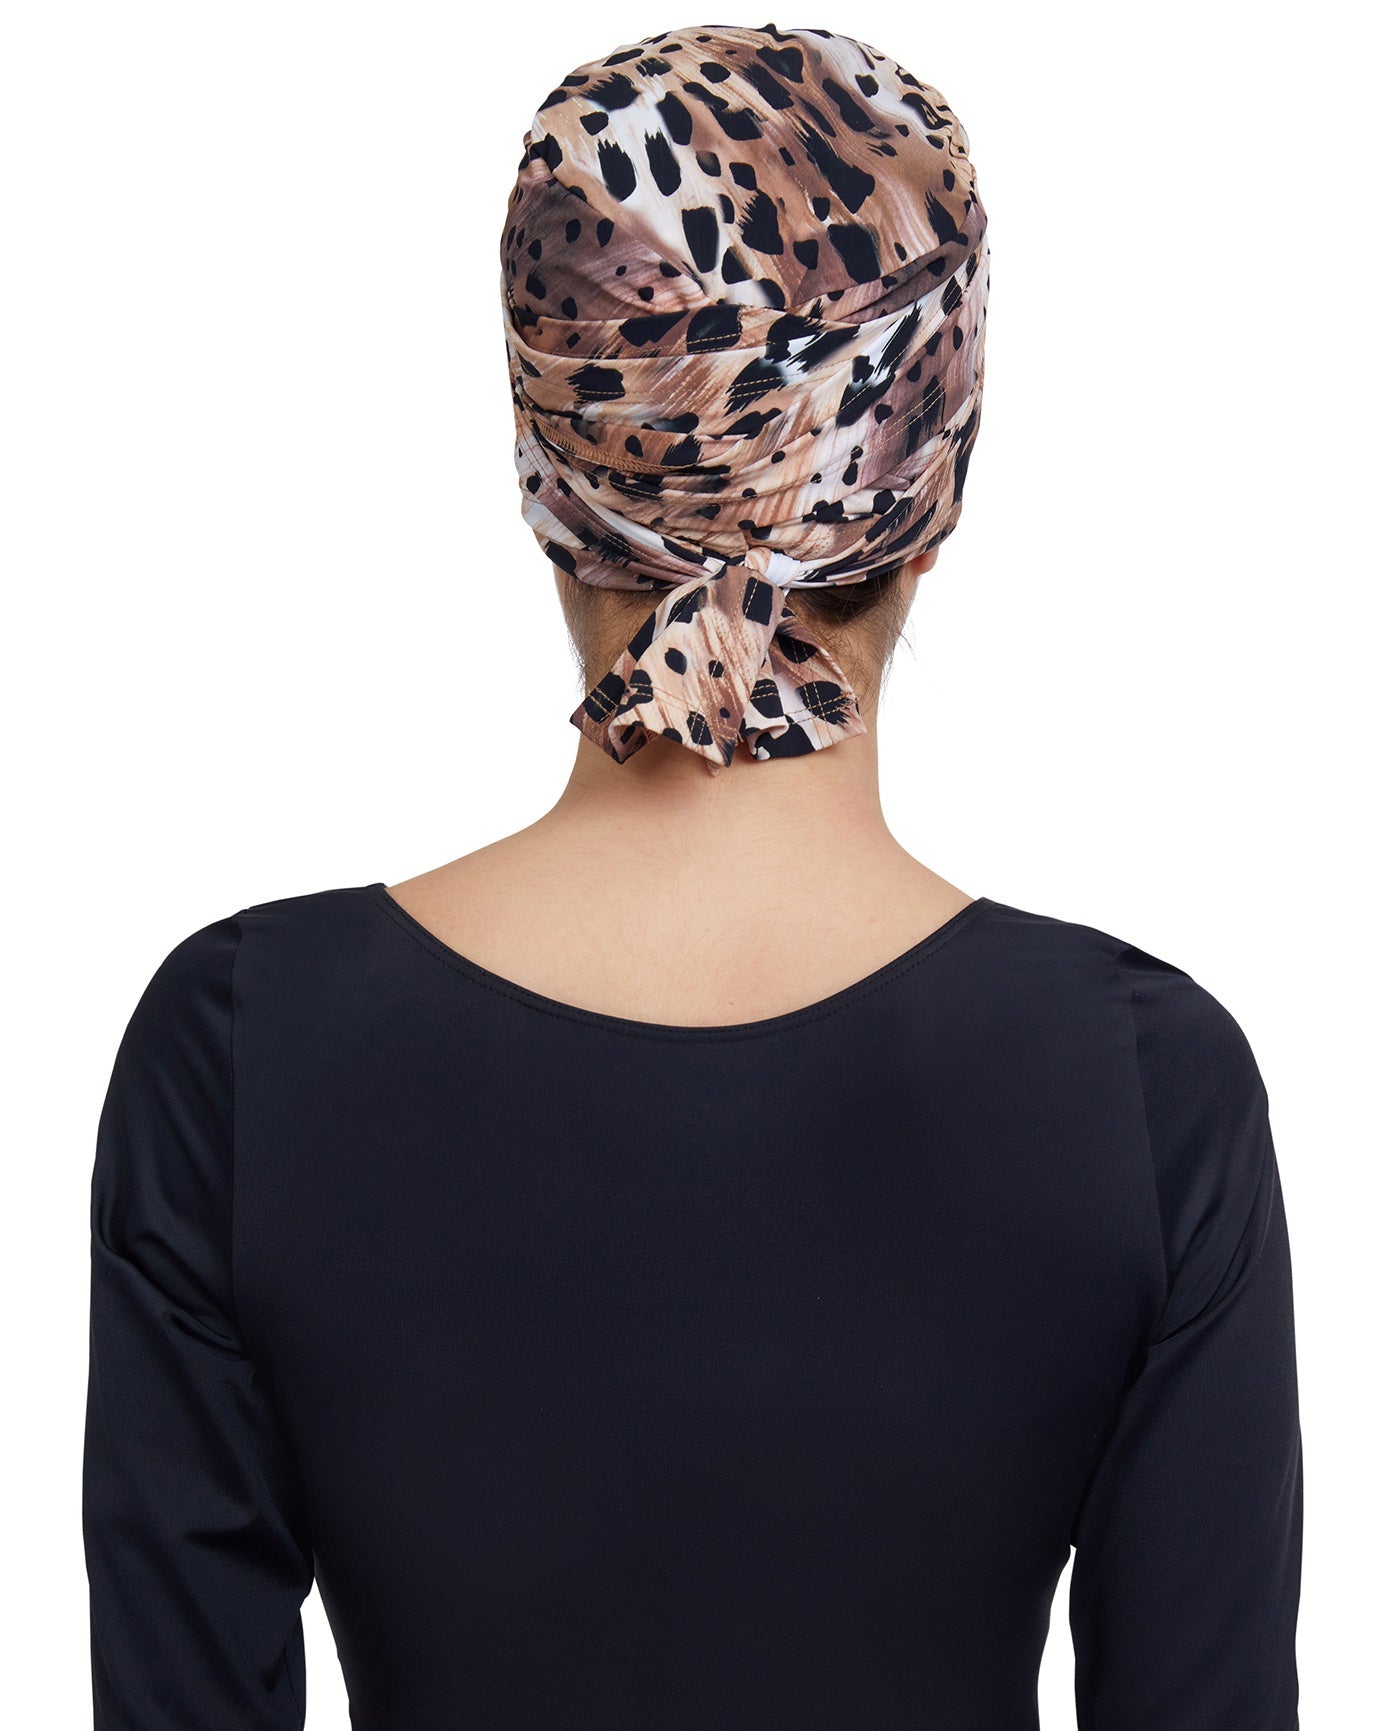 Back View Of Gottex Modest Hair Covering With Tie | GOTTEX MODEST LEOPARD